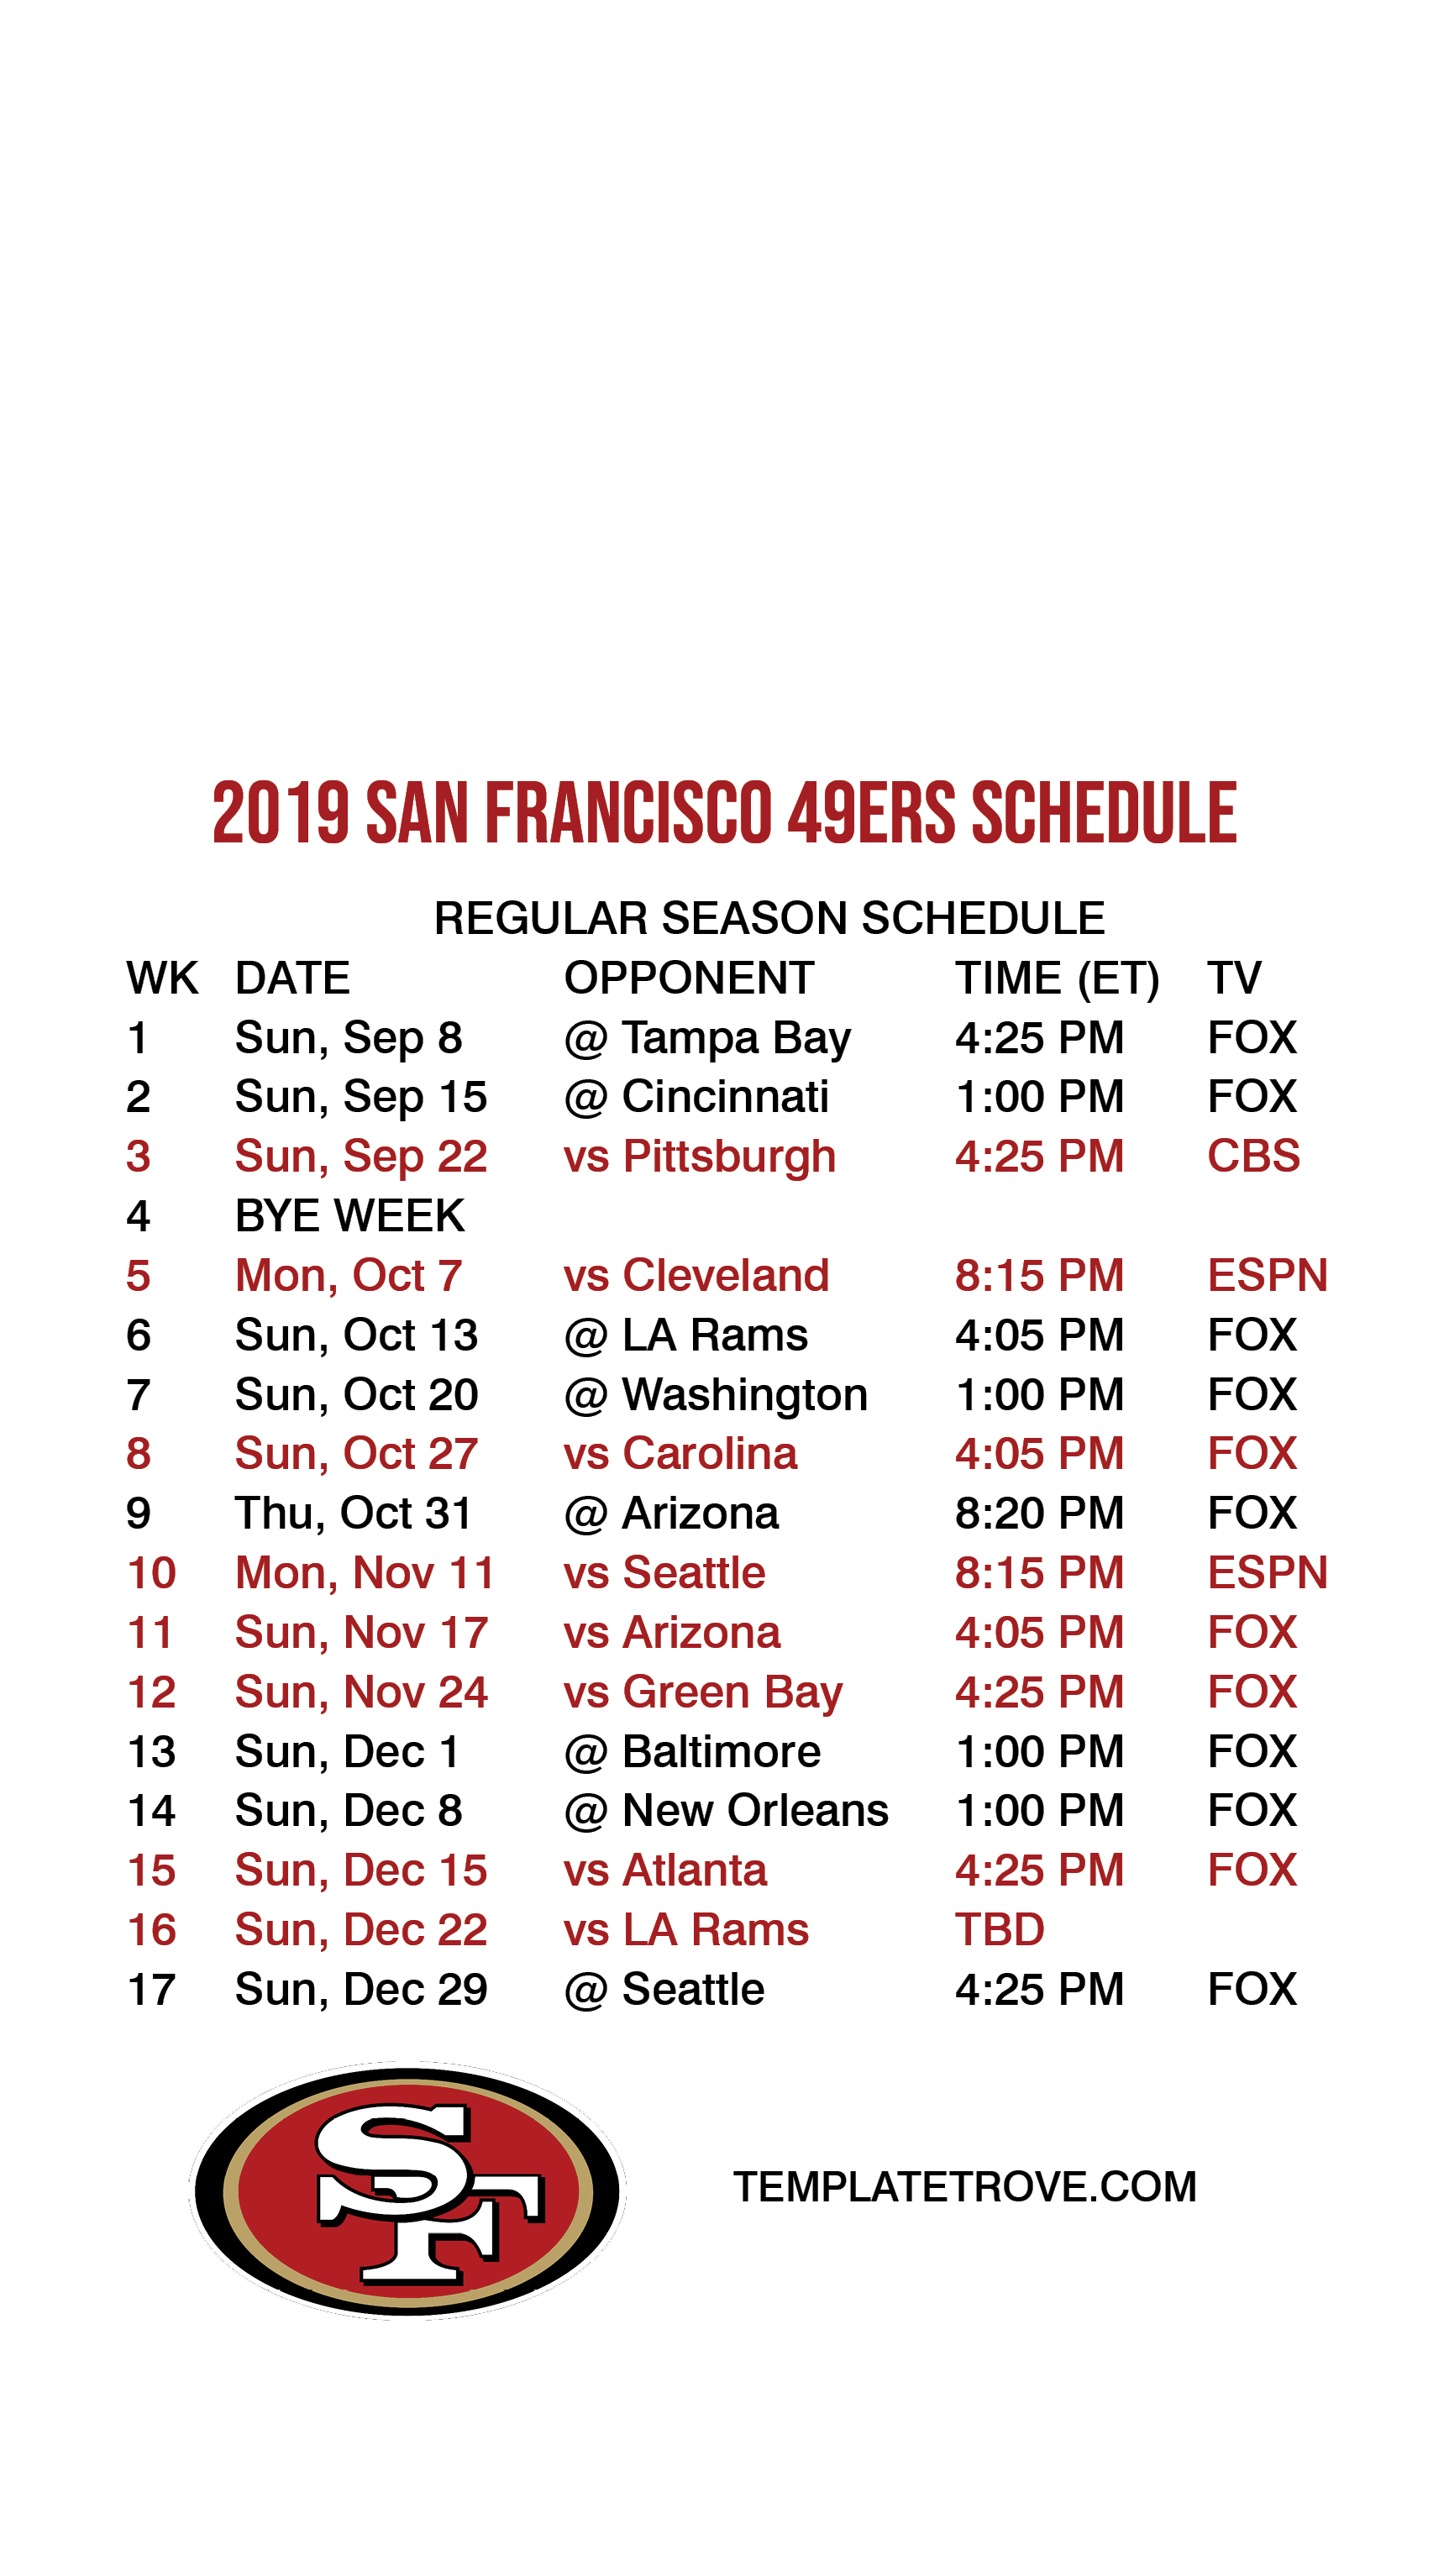 2019 2020 San Francisco 49ers Lock Screen Schedule For 